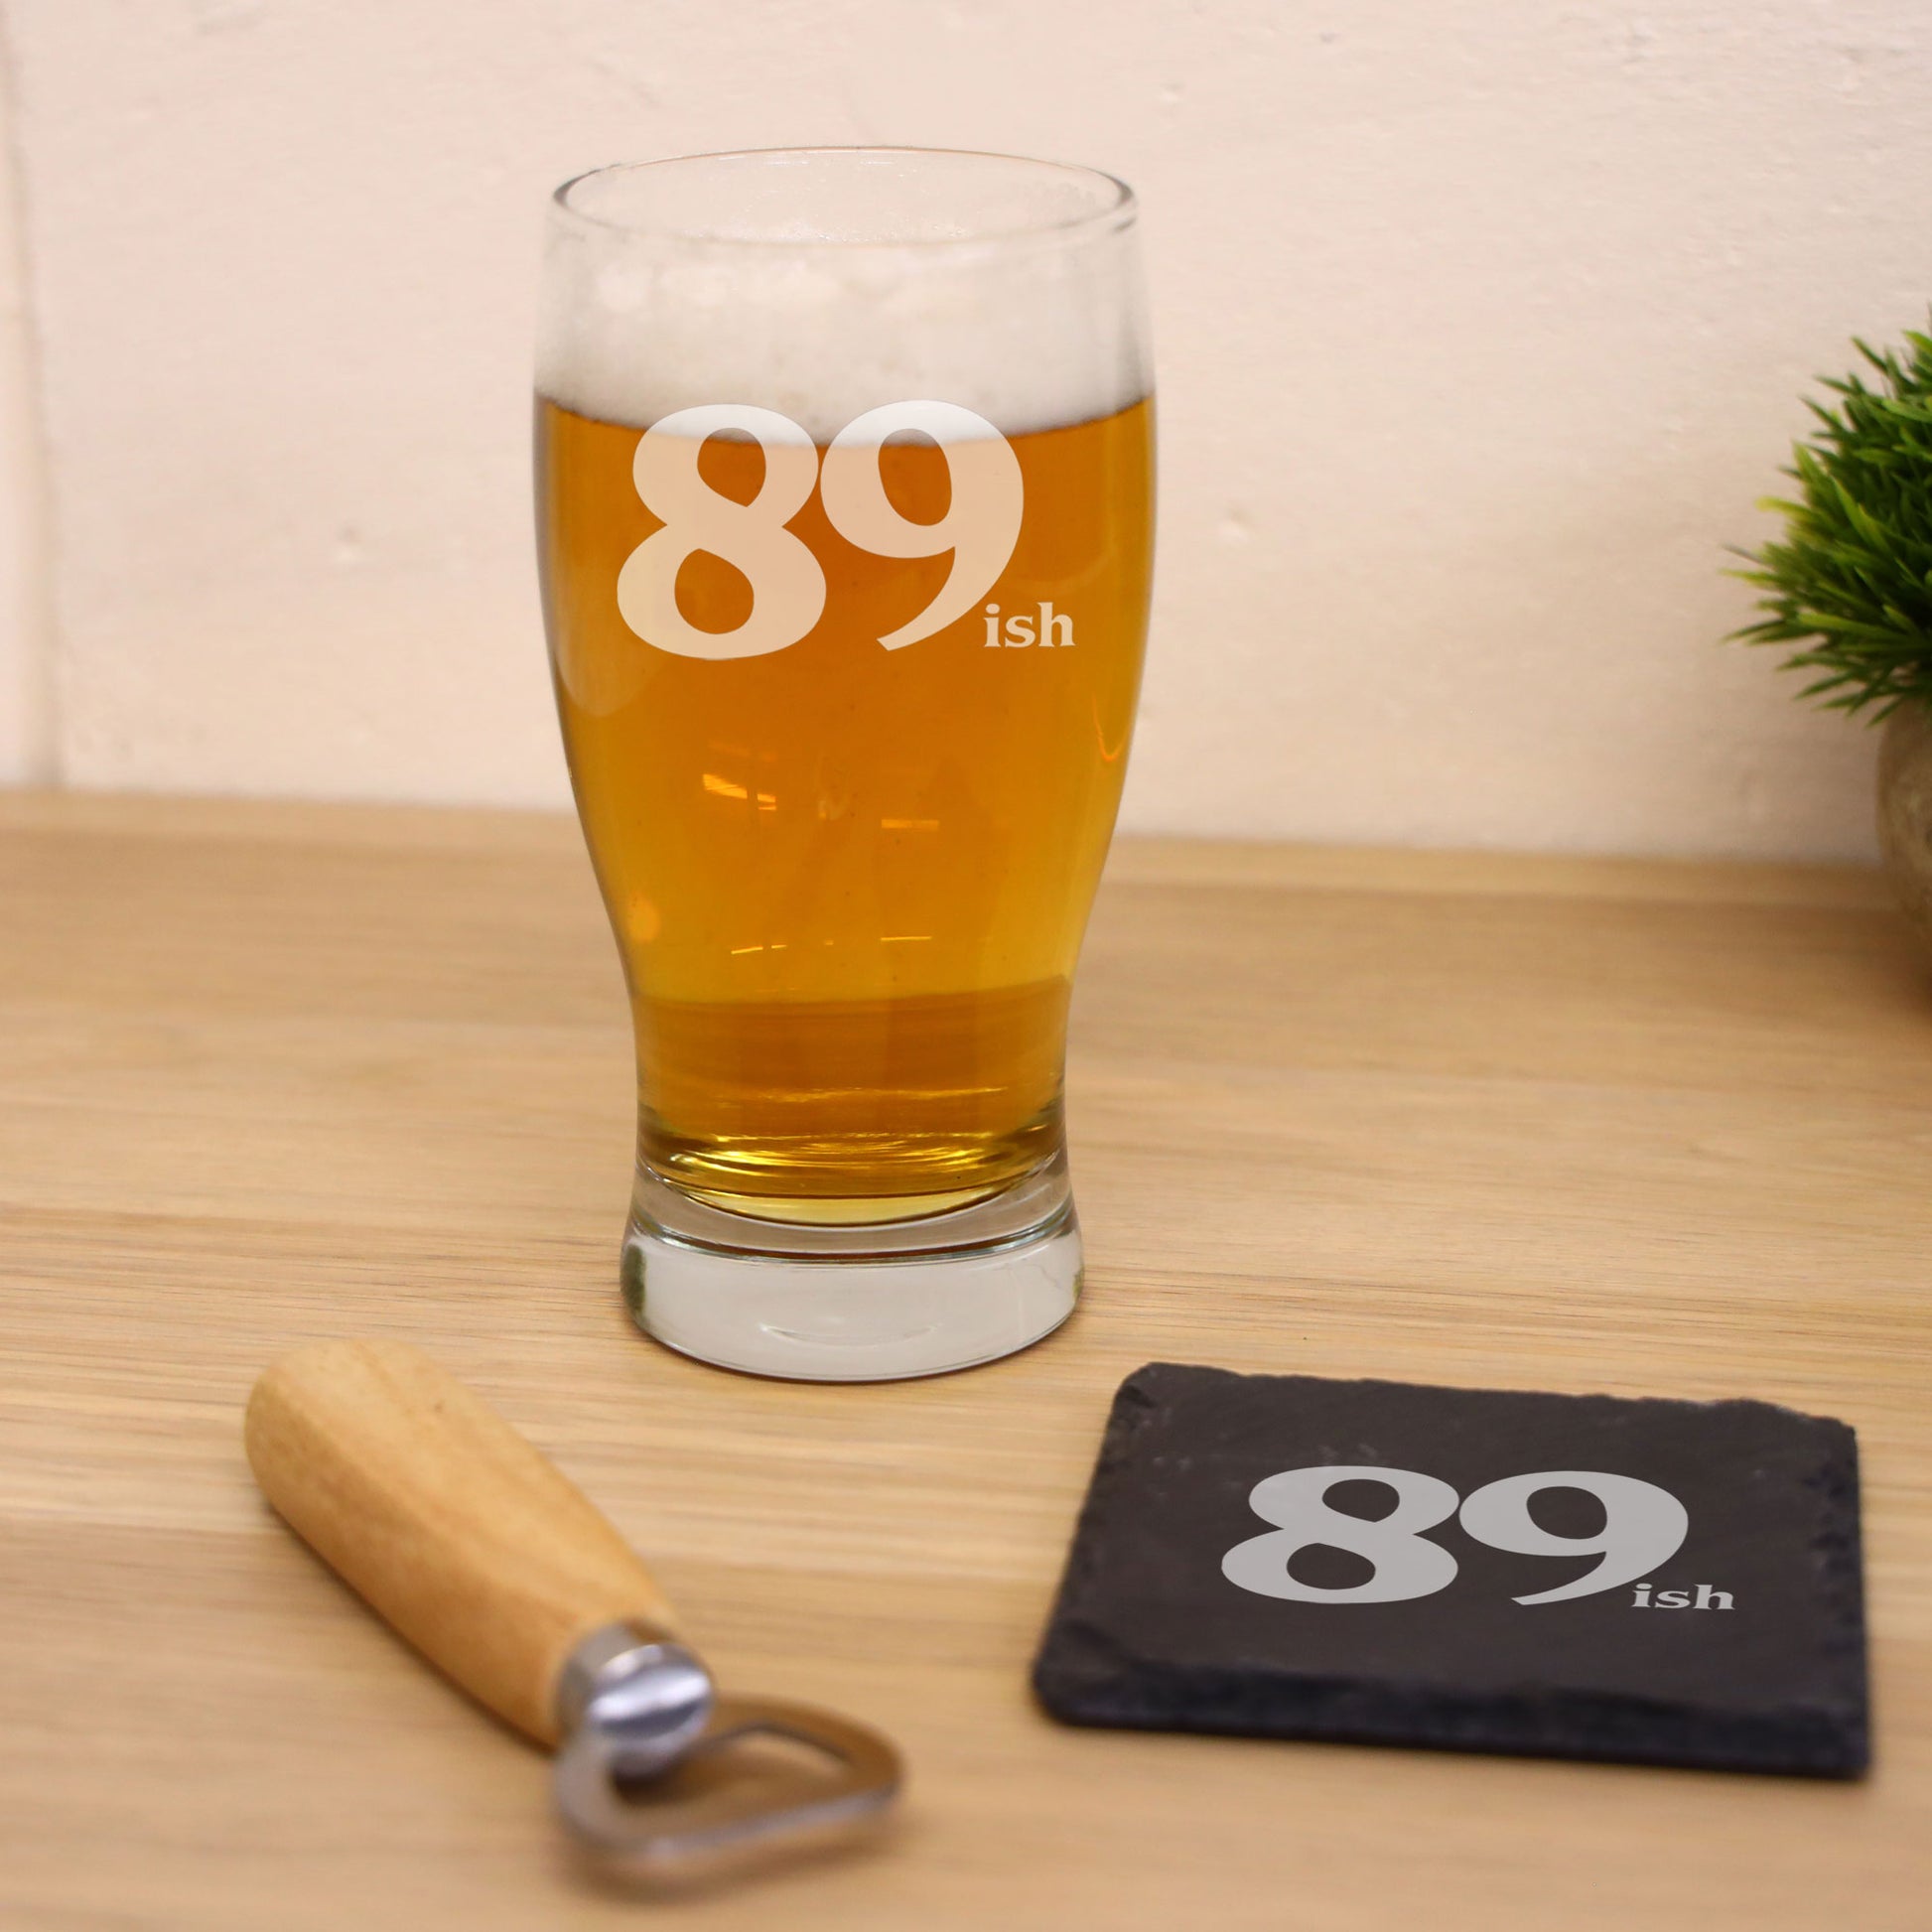 89ish Pint Glass and/or Coaster Set  - Always Looking Good - Glass & Square Coaster Set  